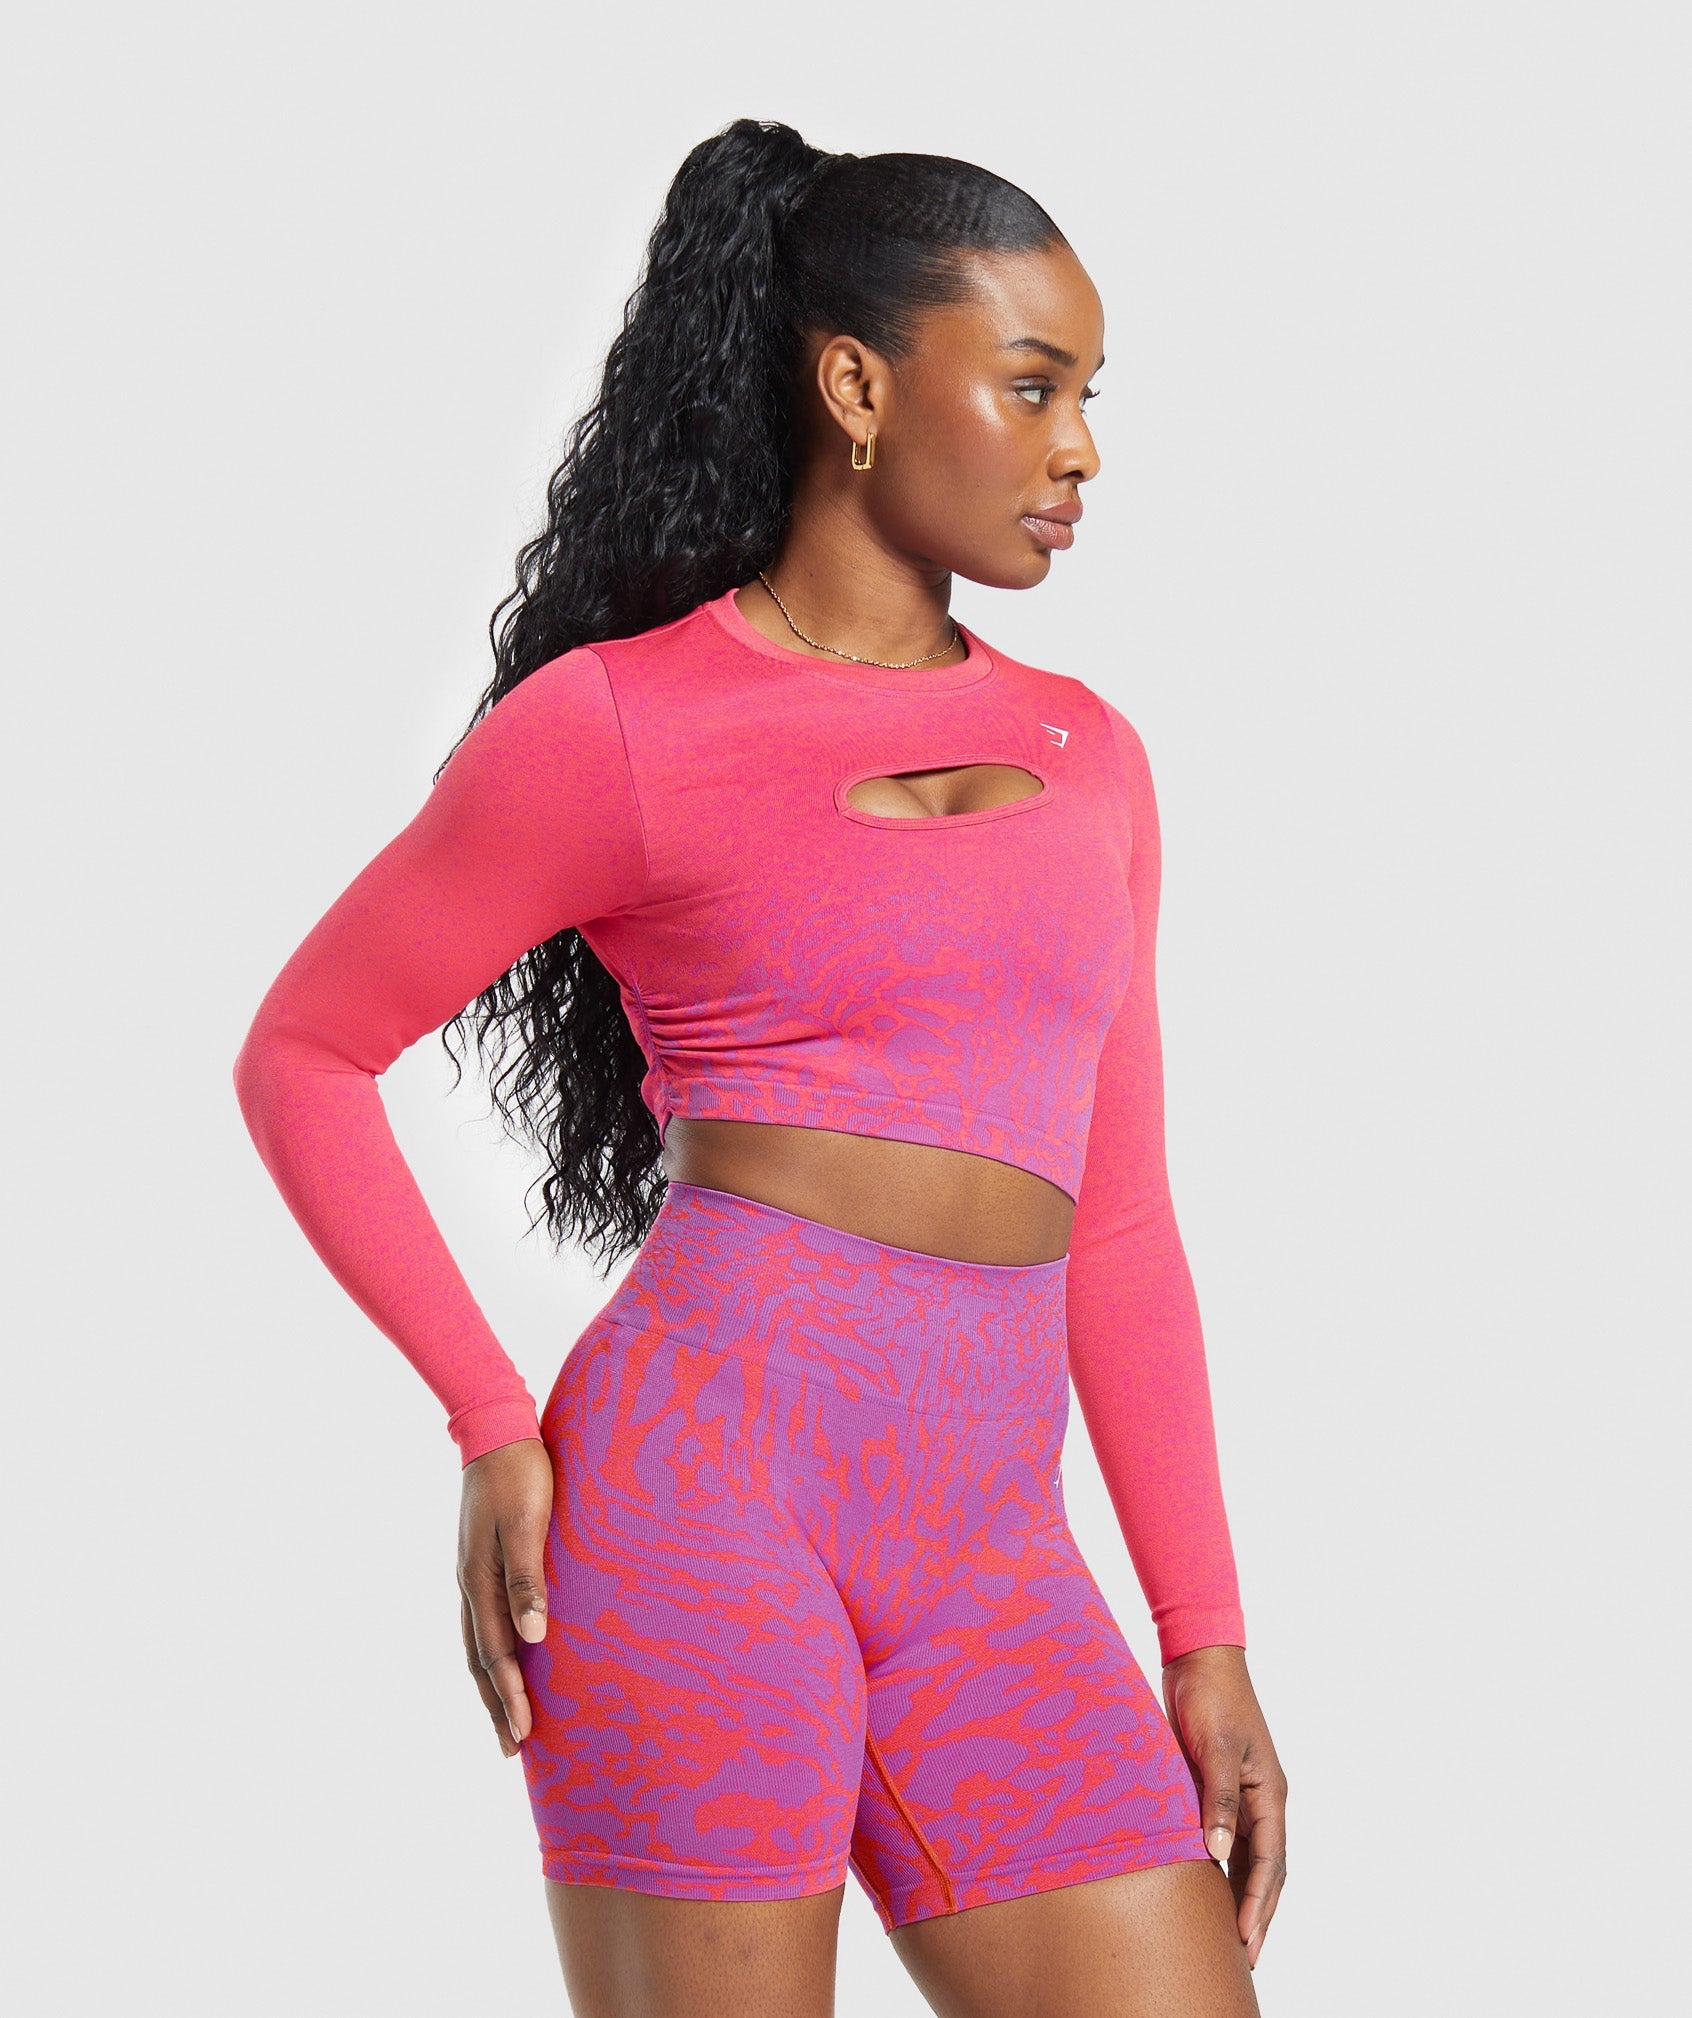 Adapt Safari Seamless Faded Long Sleeve Top in Shelly Pink/Fly Coral - view 3